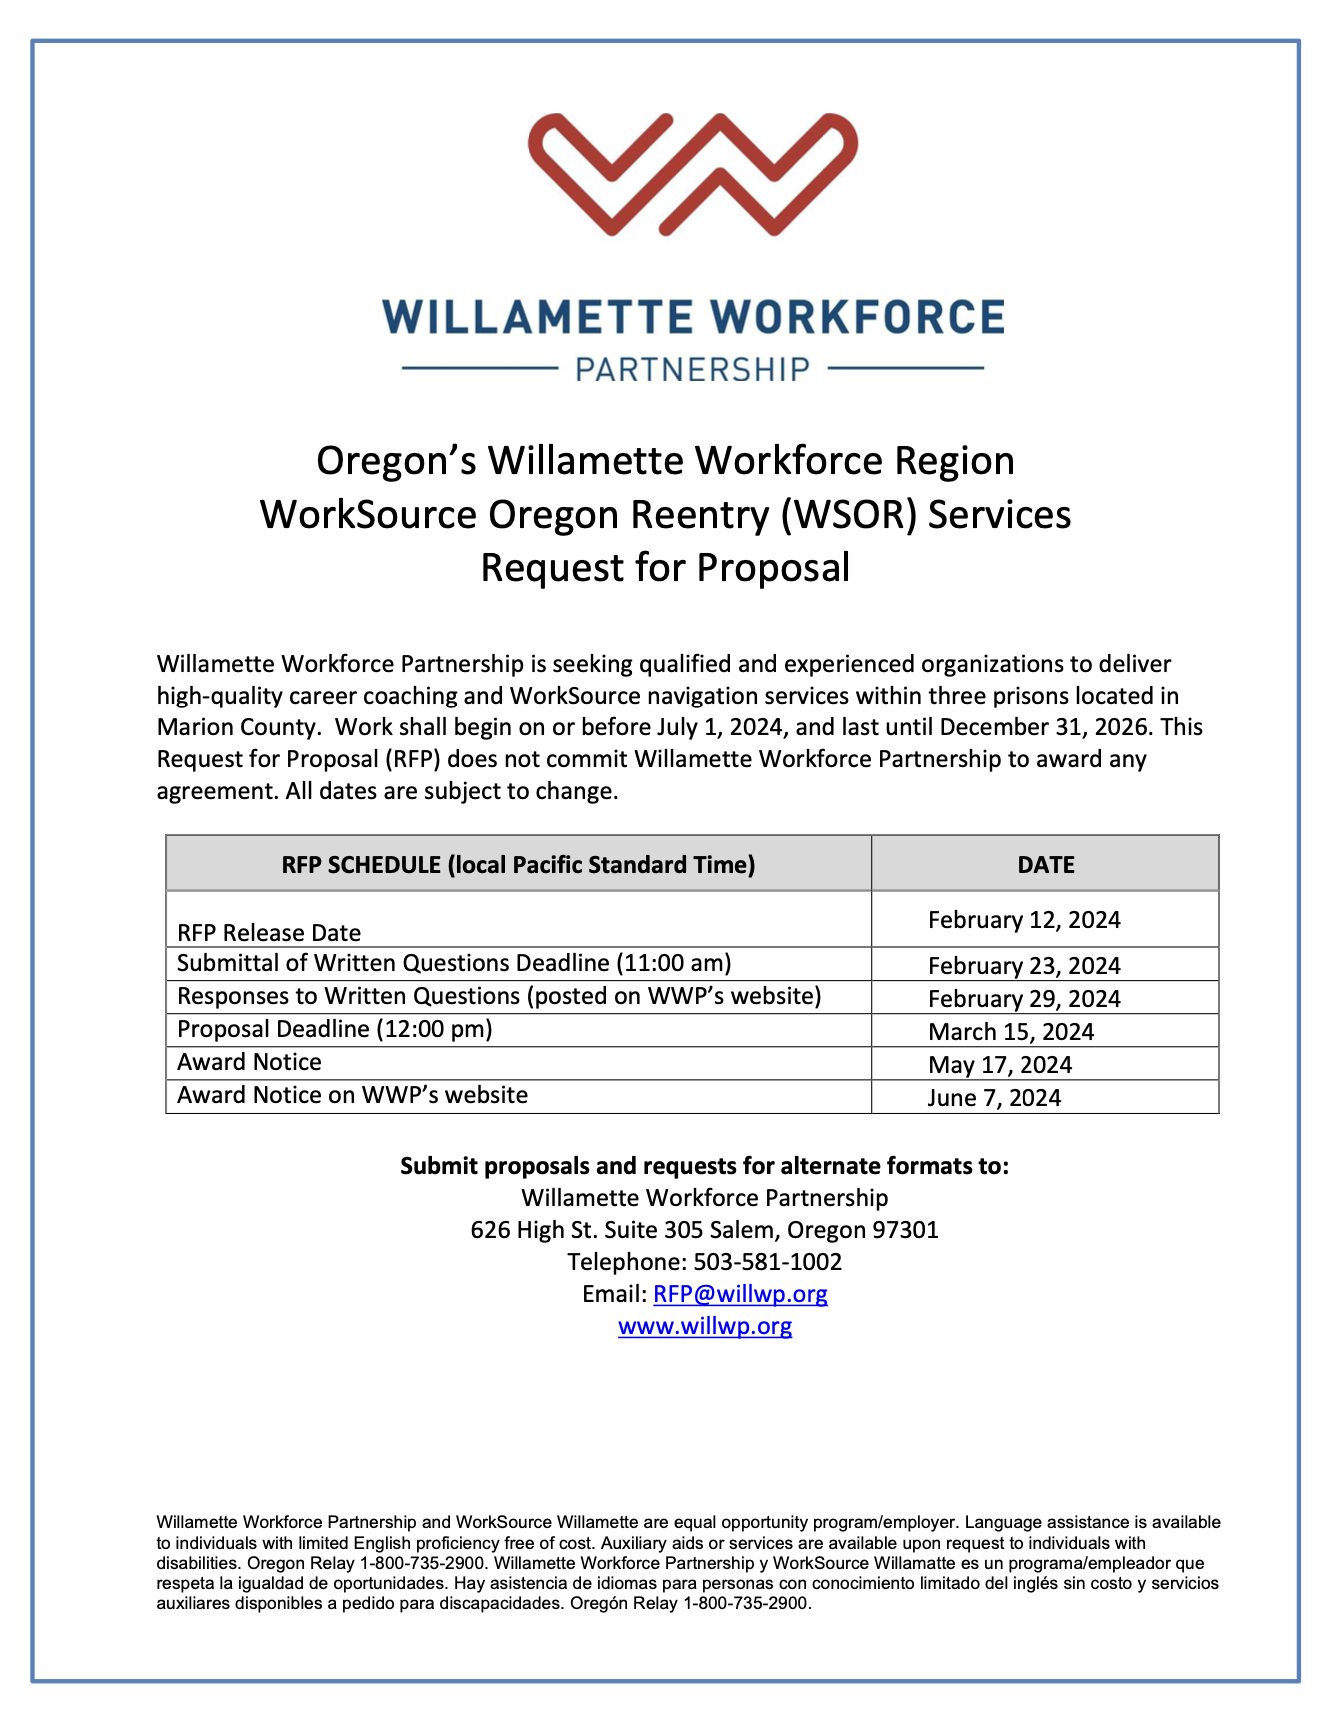 REQUEST FOR PROPOSAL WORKSOURCE OREGON REENTRY SERVICES